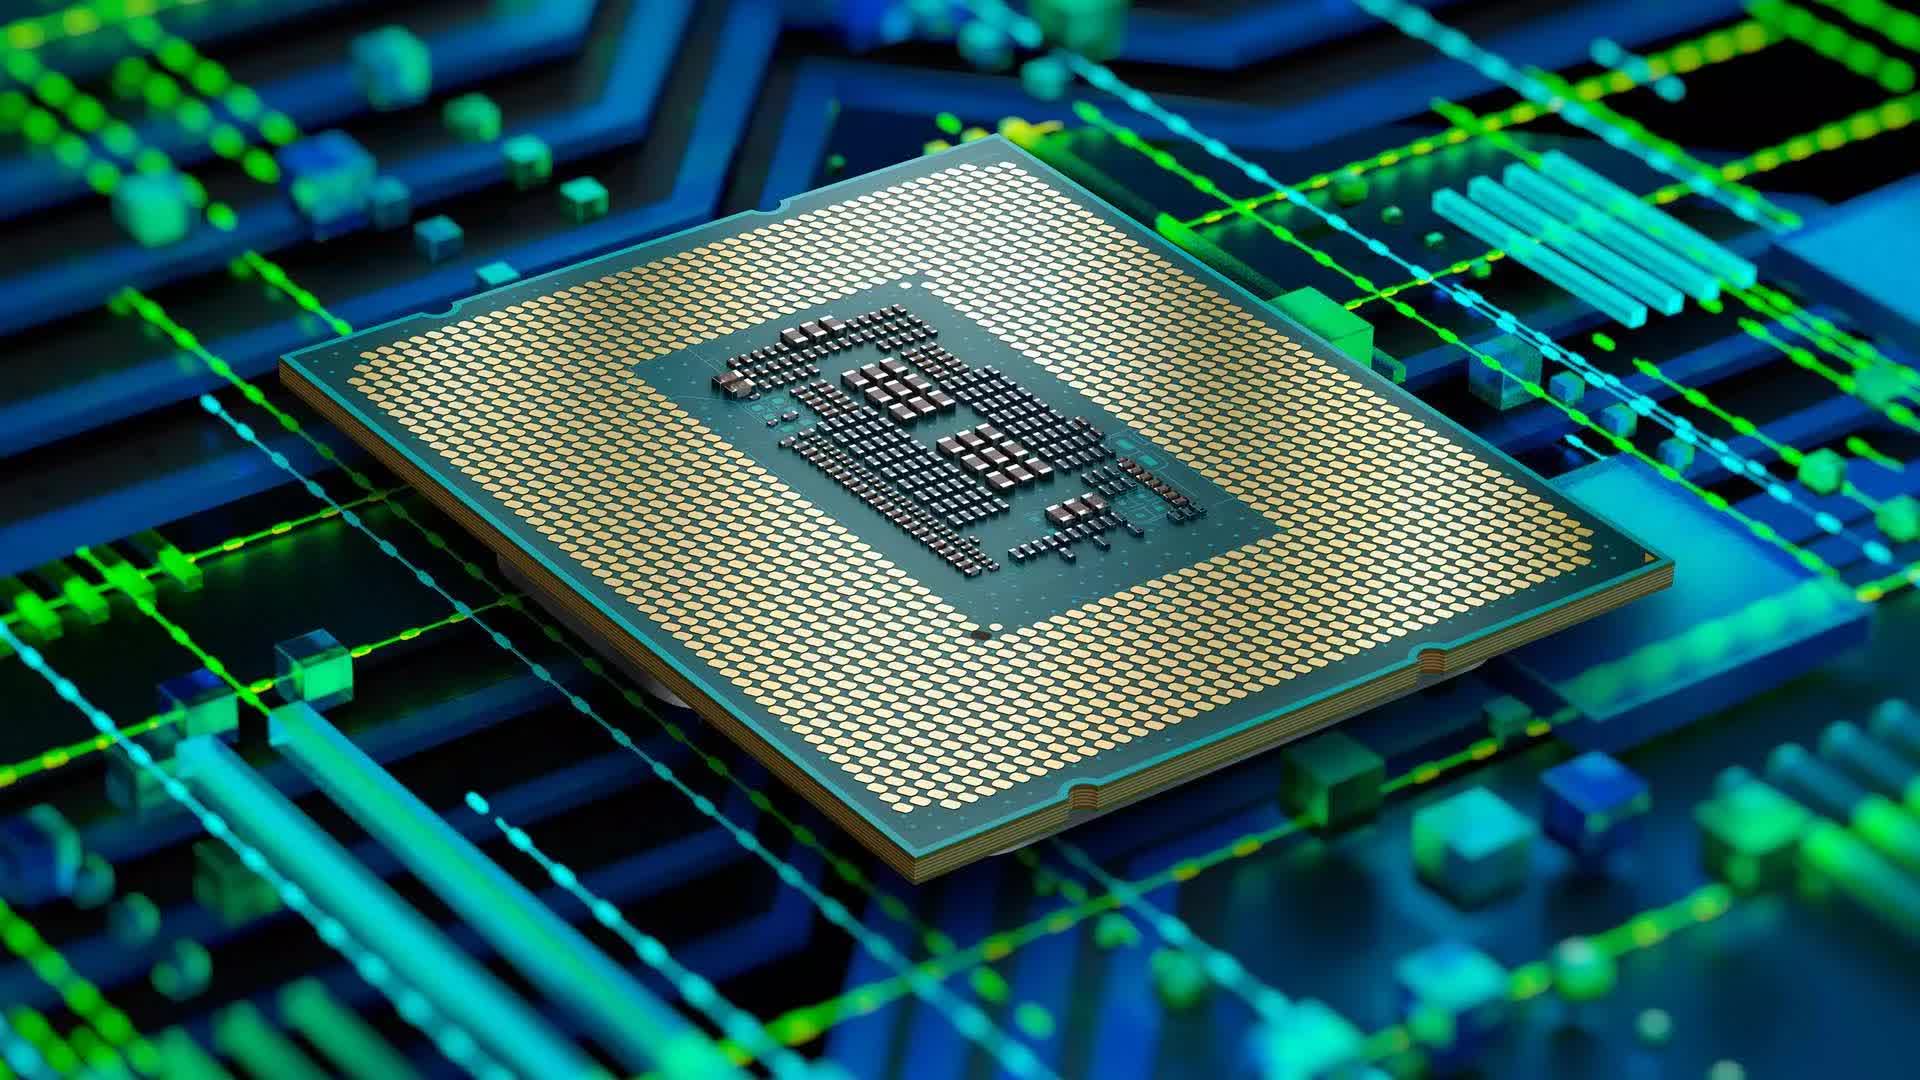 Intel says Raptor Lake includes 6 GHz CPU stock, expected to set 8 GHz overclocking world record